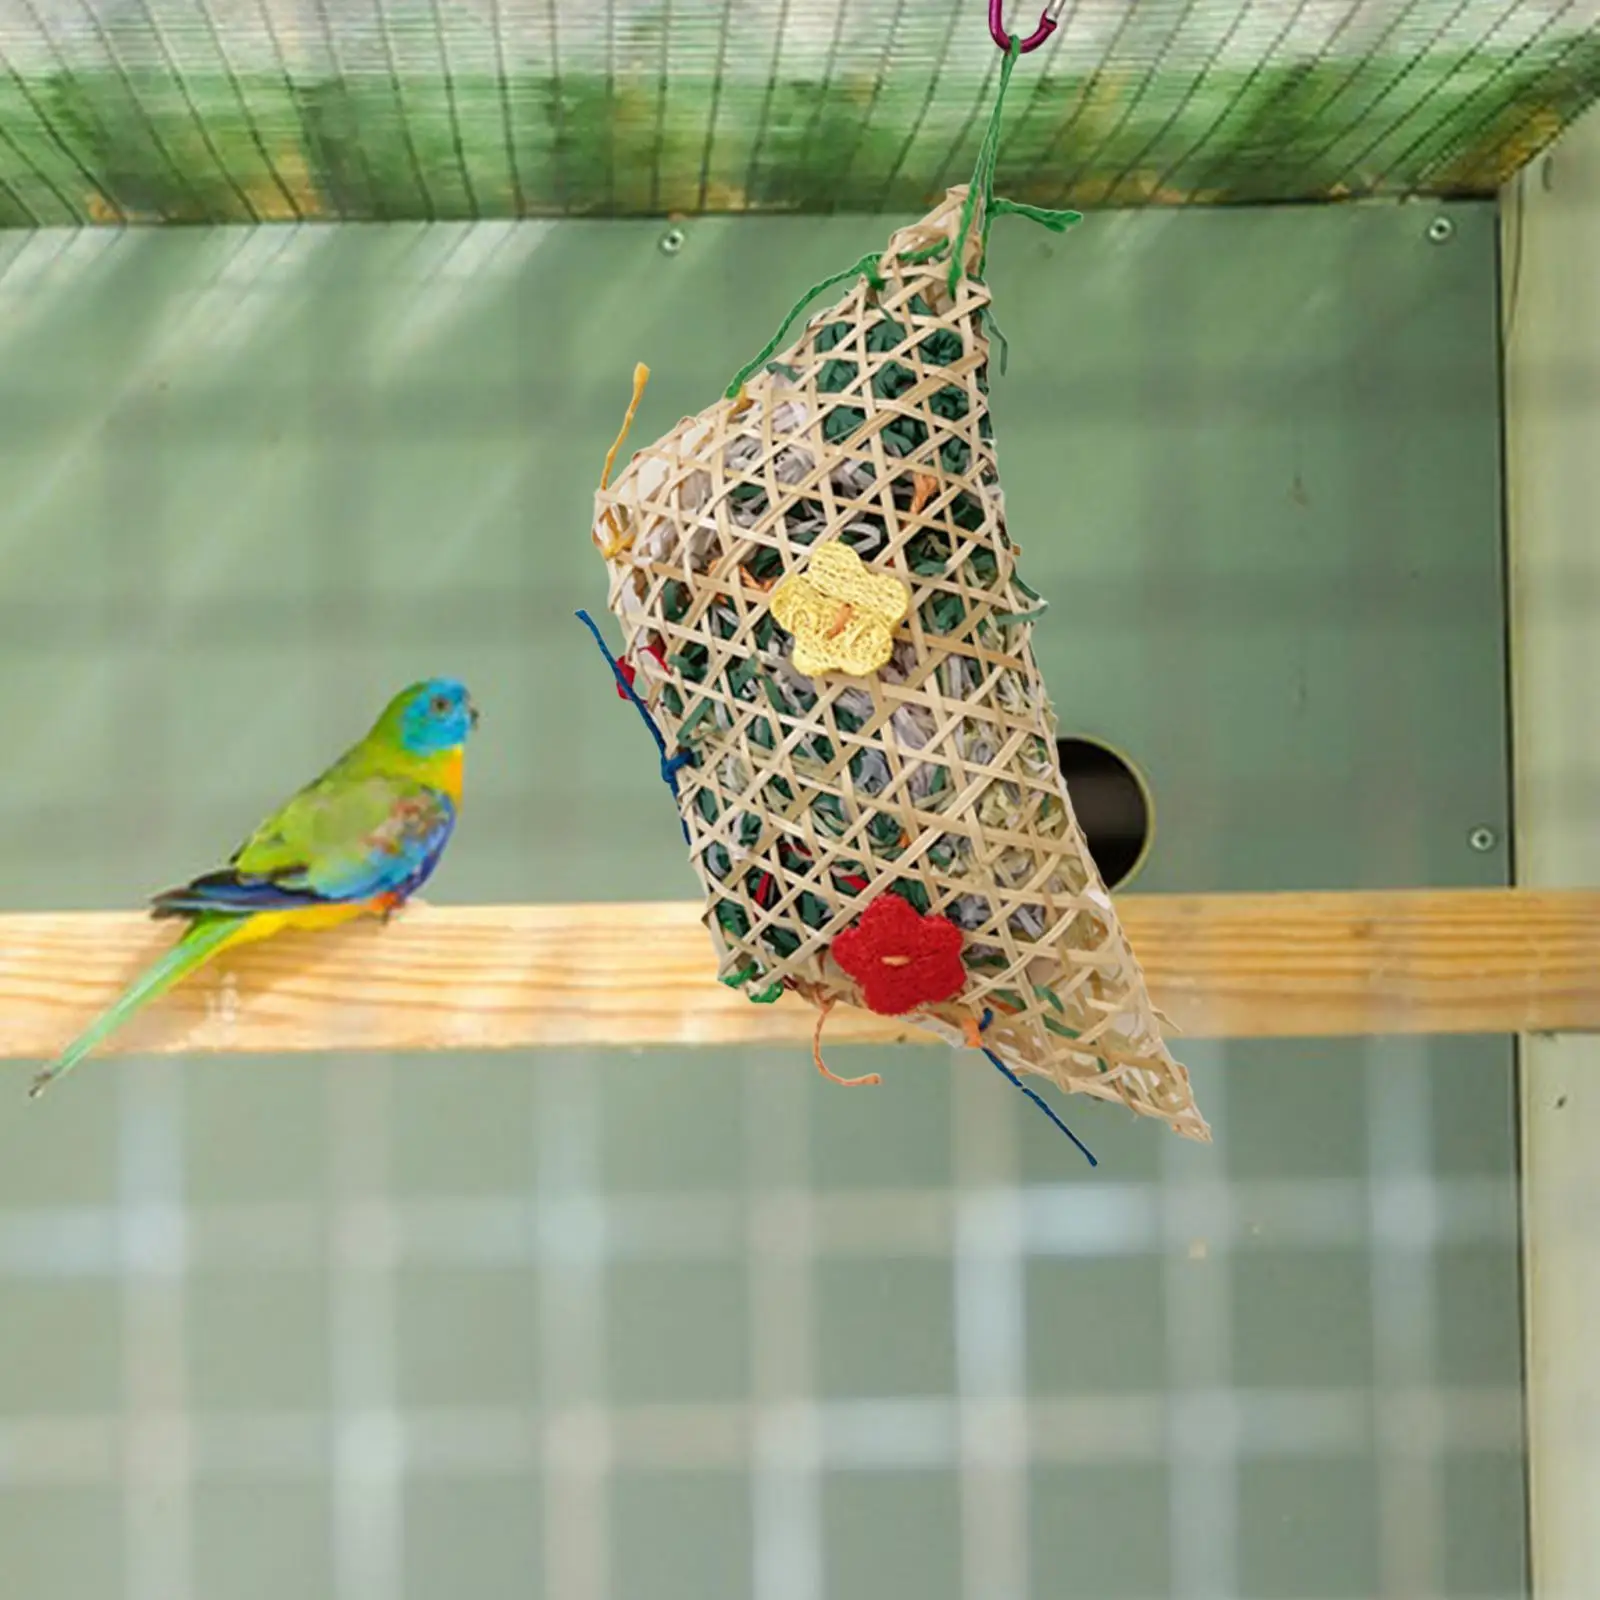 Parrot Chew Toy Bird Chewing Toy Hanging Parrot Cage Bite Toy for Cockatiels Small Medium Large Birds Parrot Finches Accessories